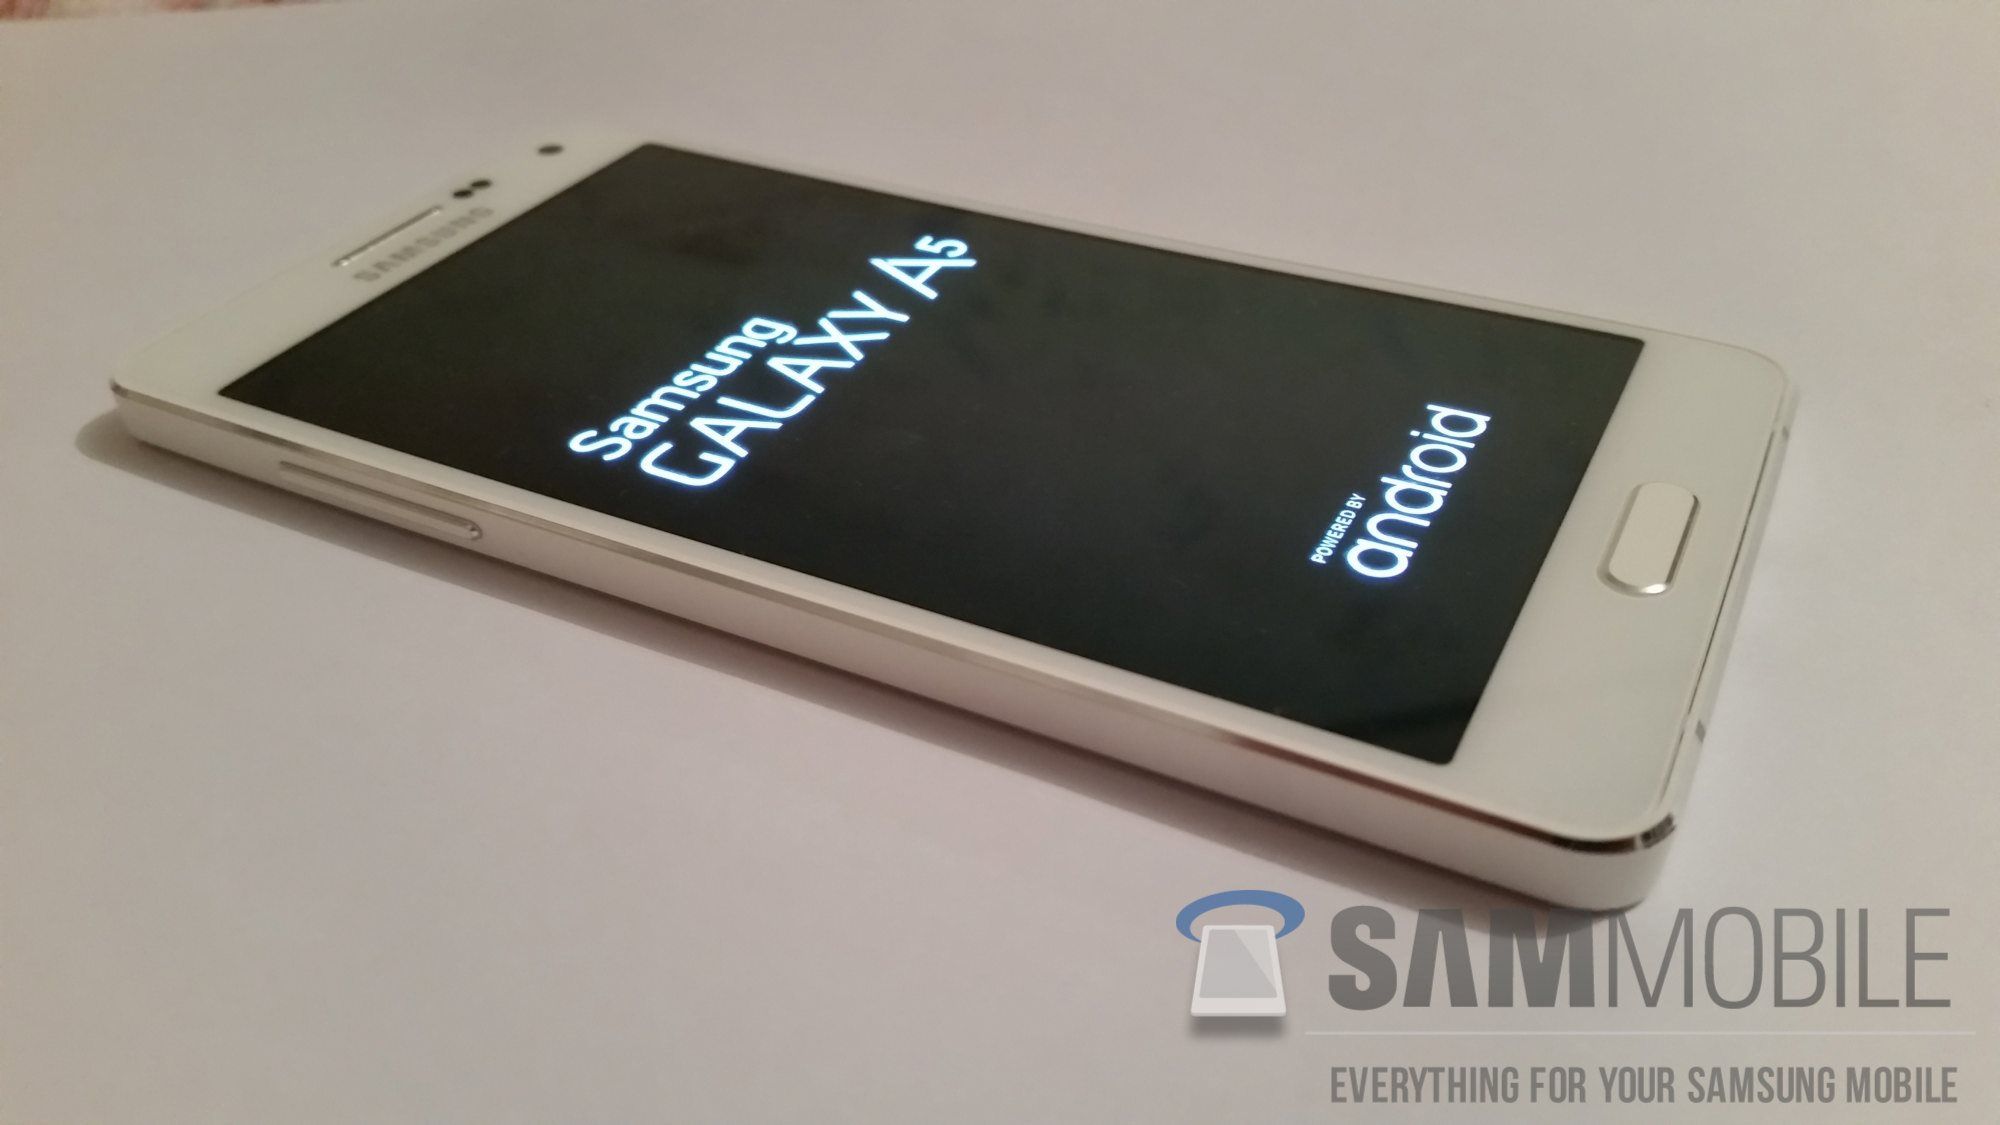 samsung galaxy a5 picture leaked and it looks even more like an iphone than the alpha image 1